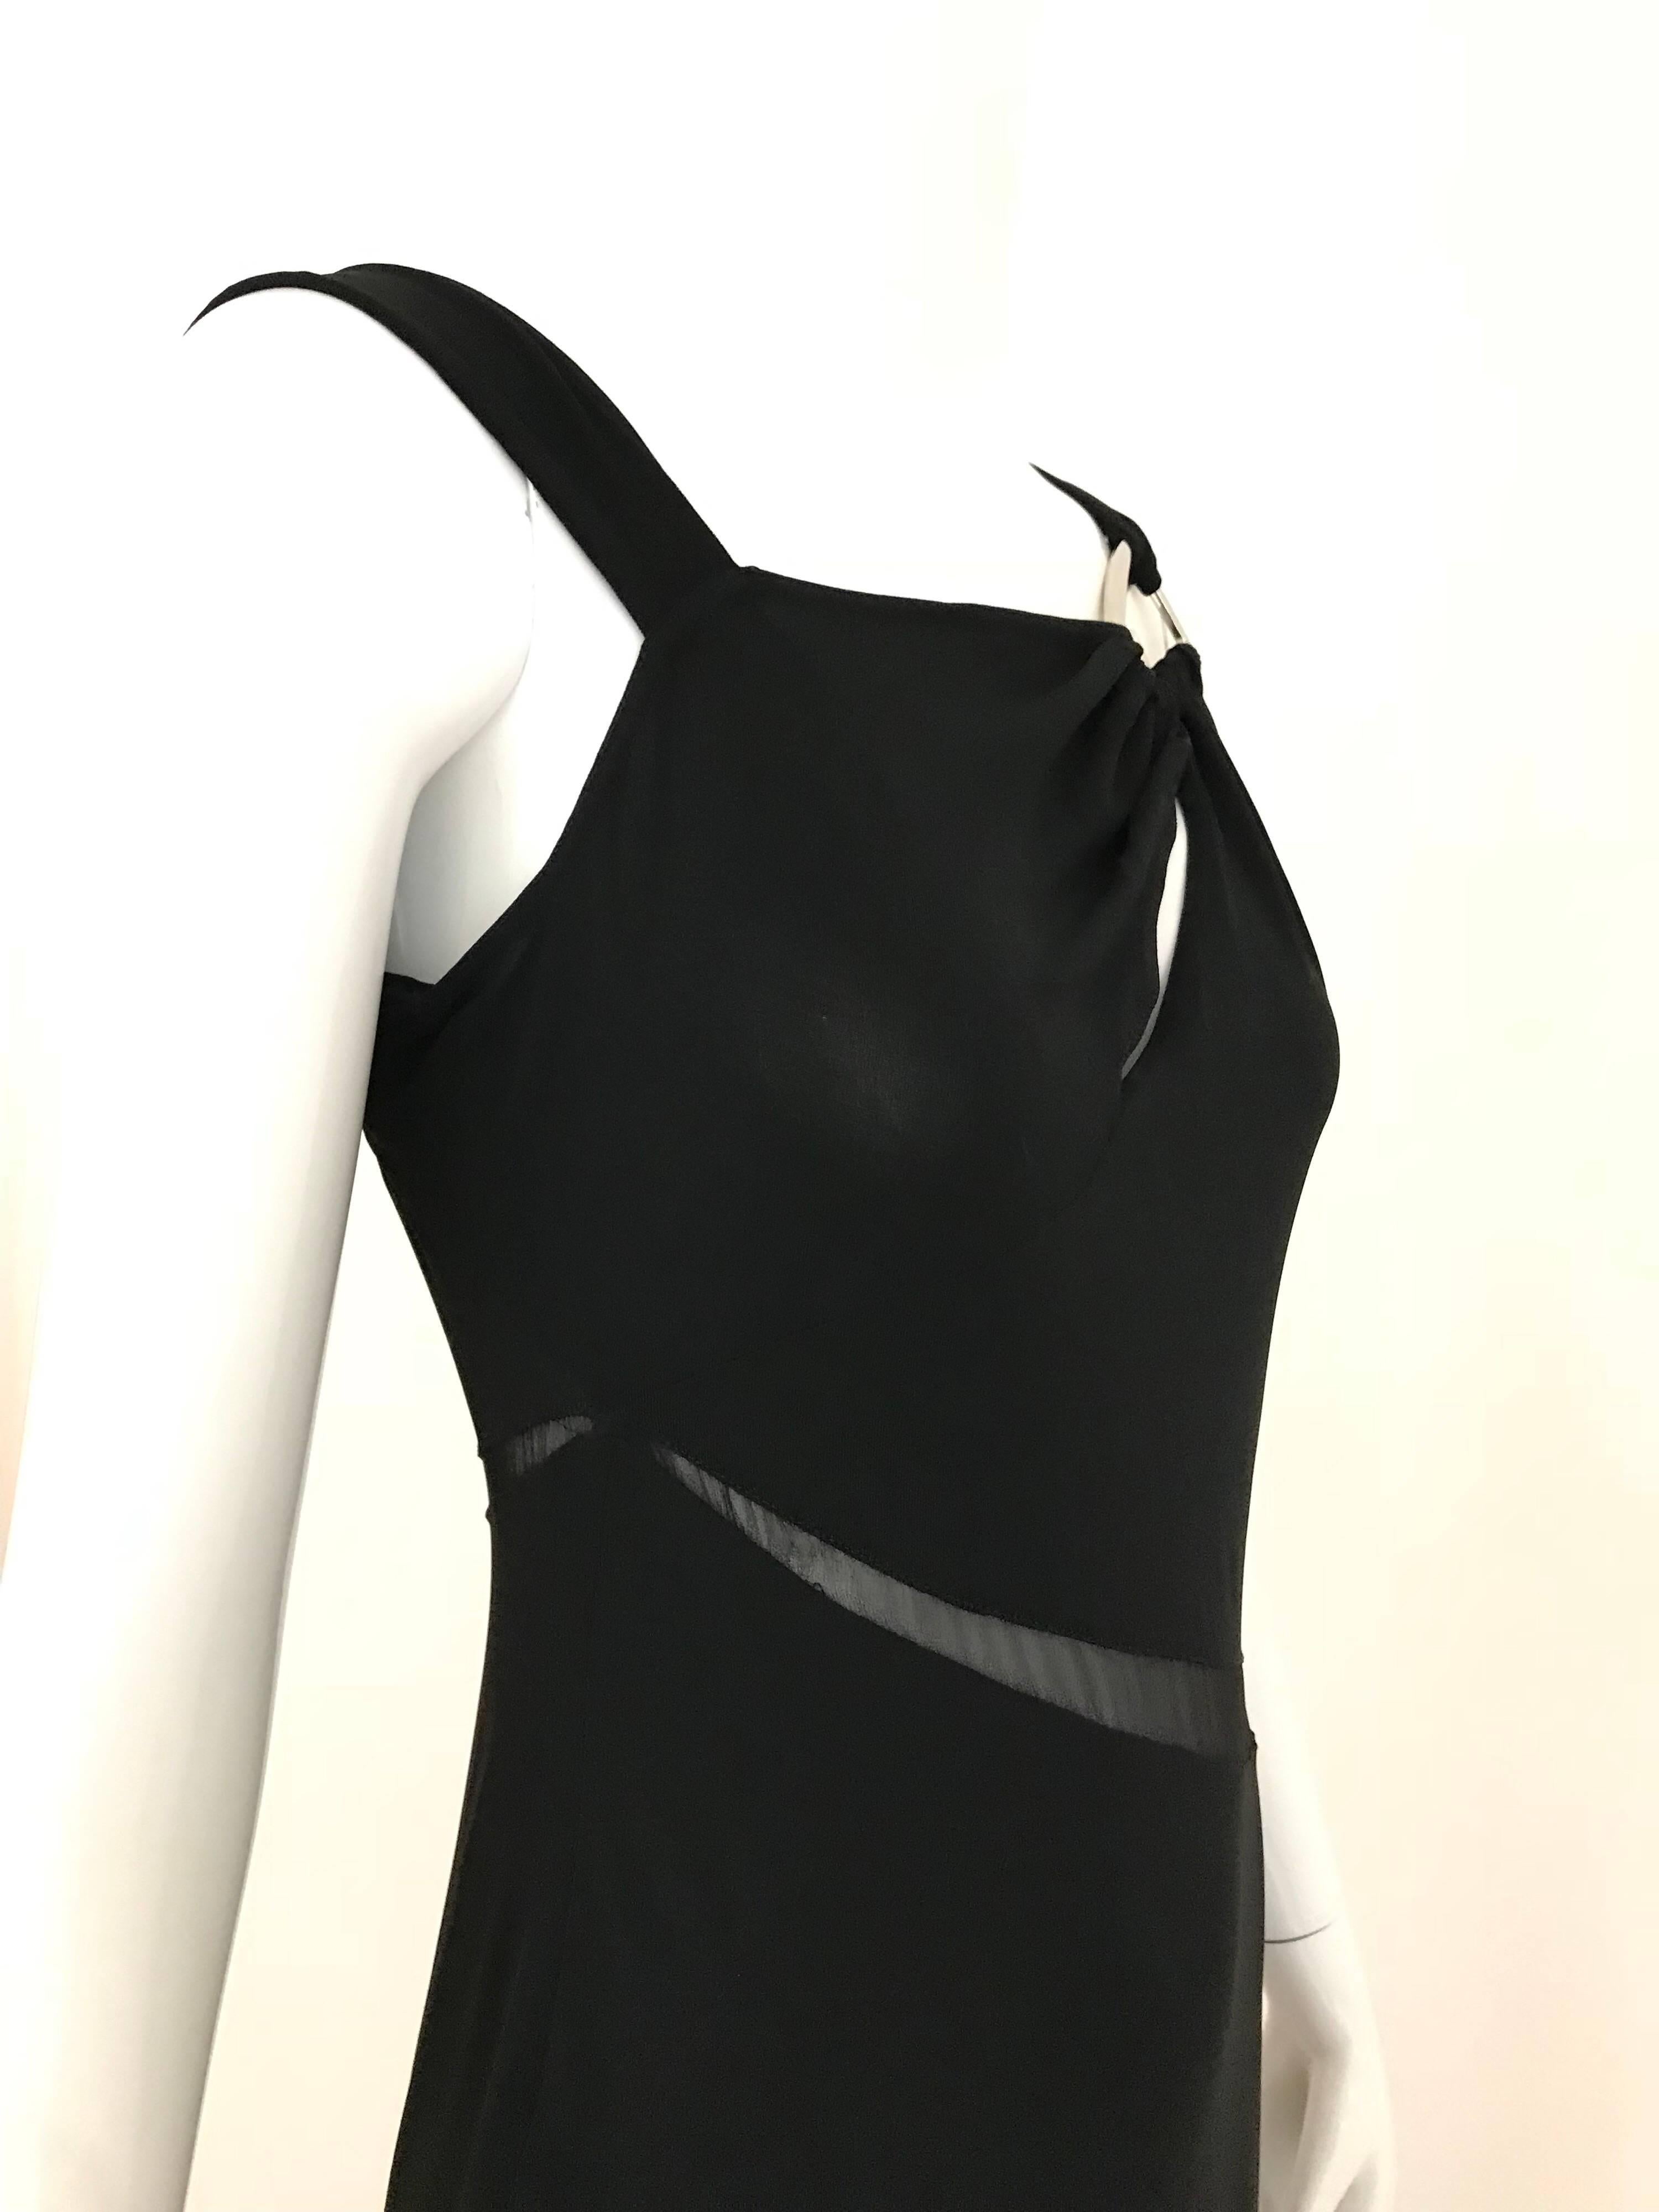 Vintage Claude montana black silk and jersey cut out gown.
Small -  Medium
Bust 36 inches